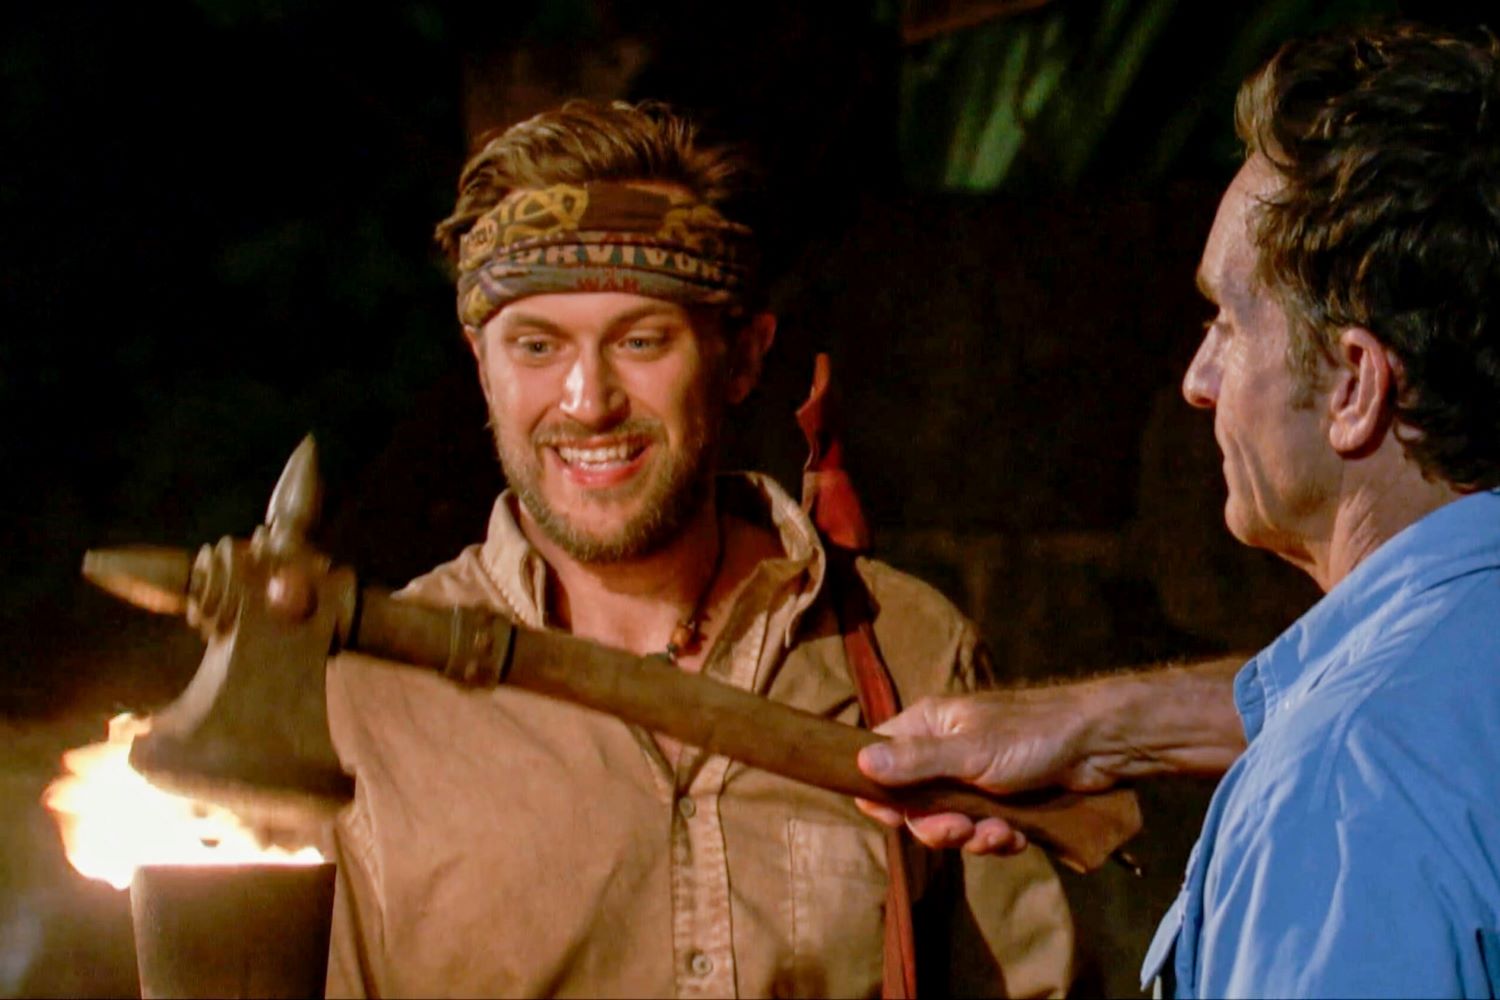 Jeff Probst extinguishes Nick Wilson's torch at Tribal Council in 'Survivor: Winners at War.'